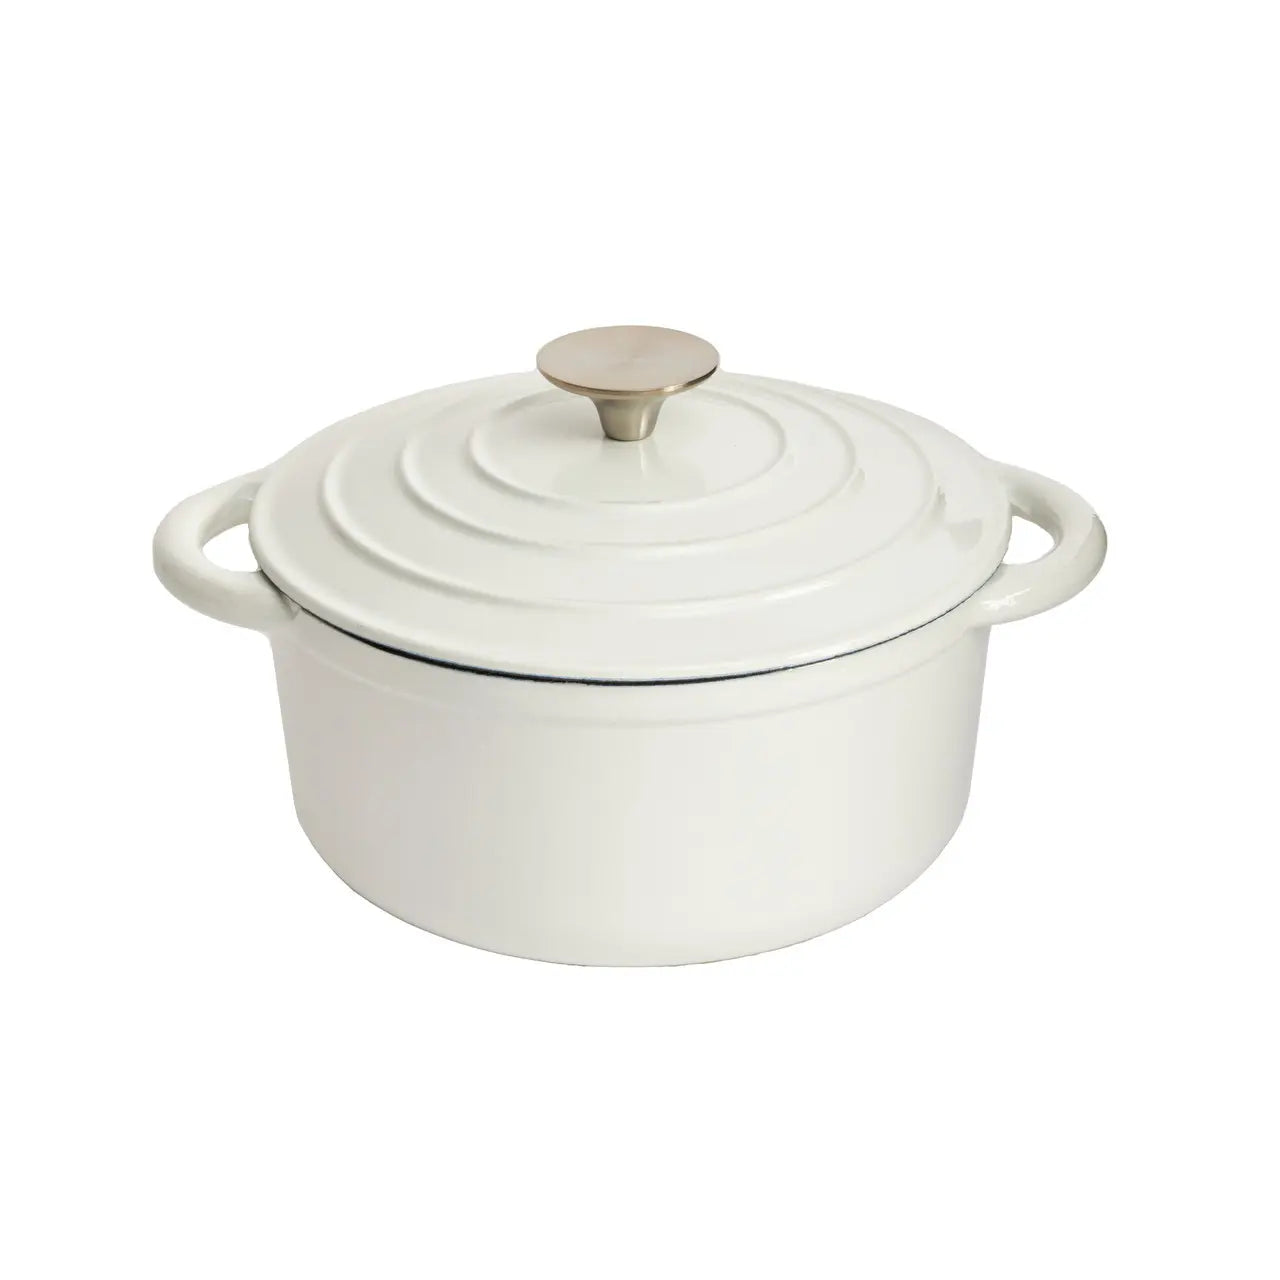 Enameled Cast Iron 8 1/4 inch Round Dutch Oven in White